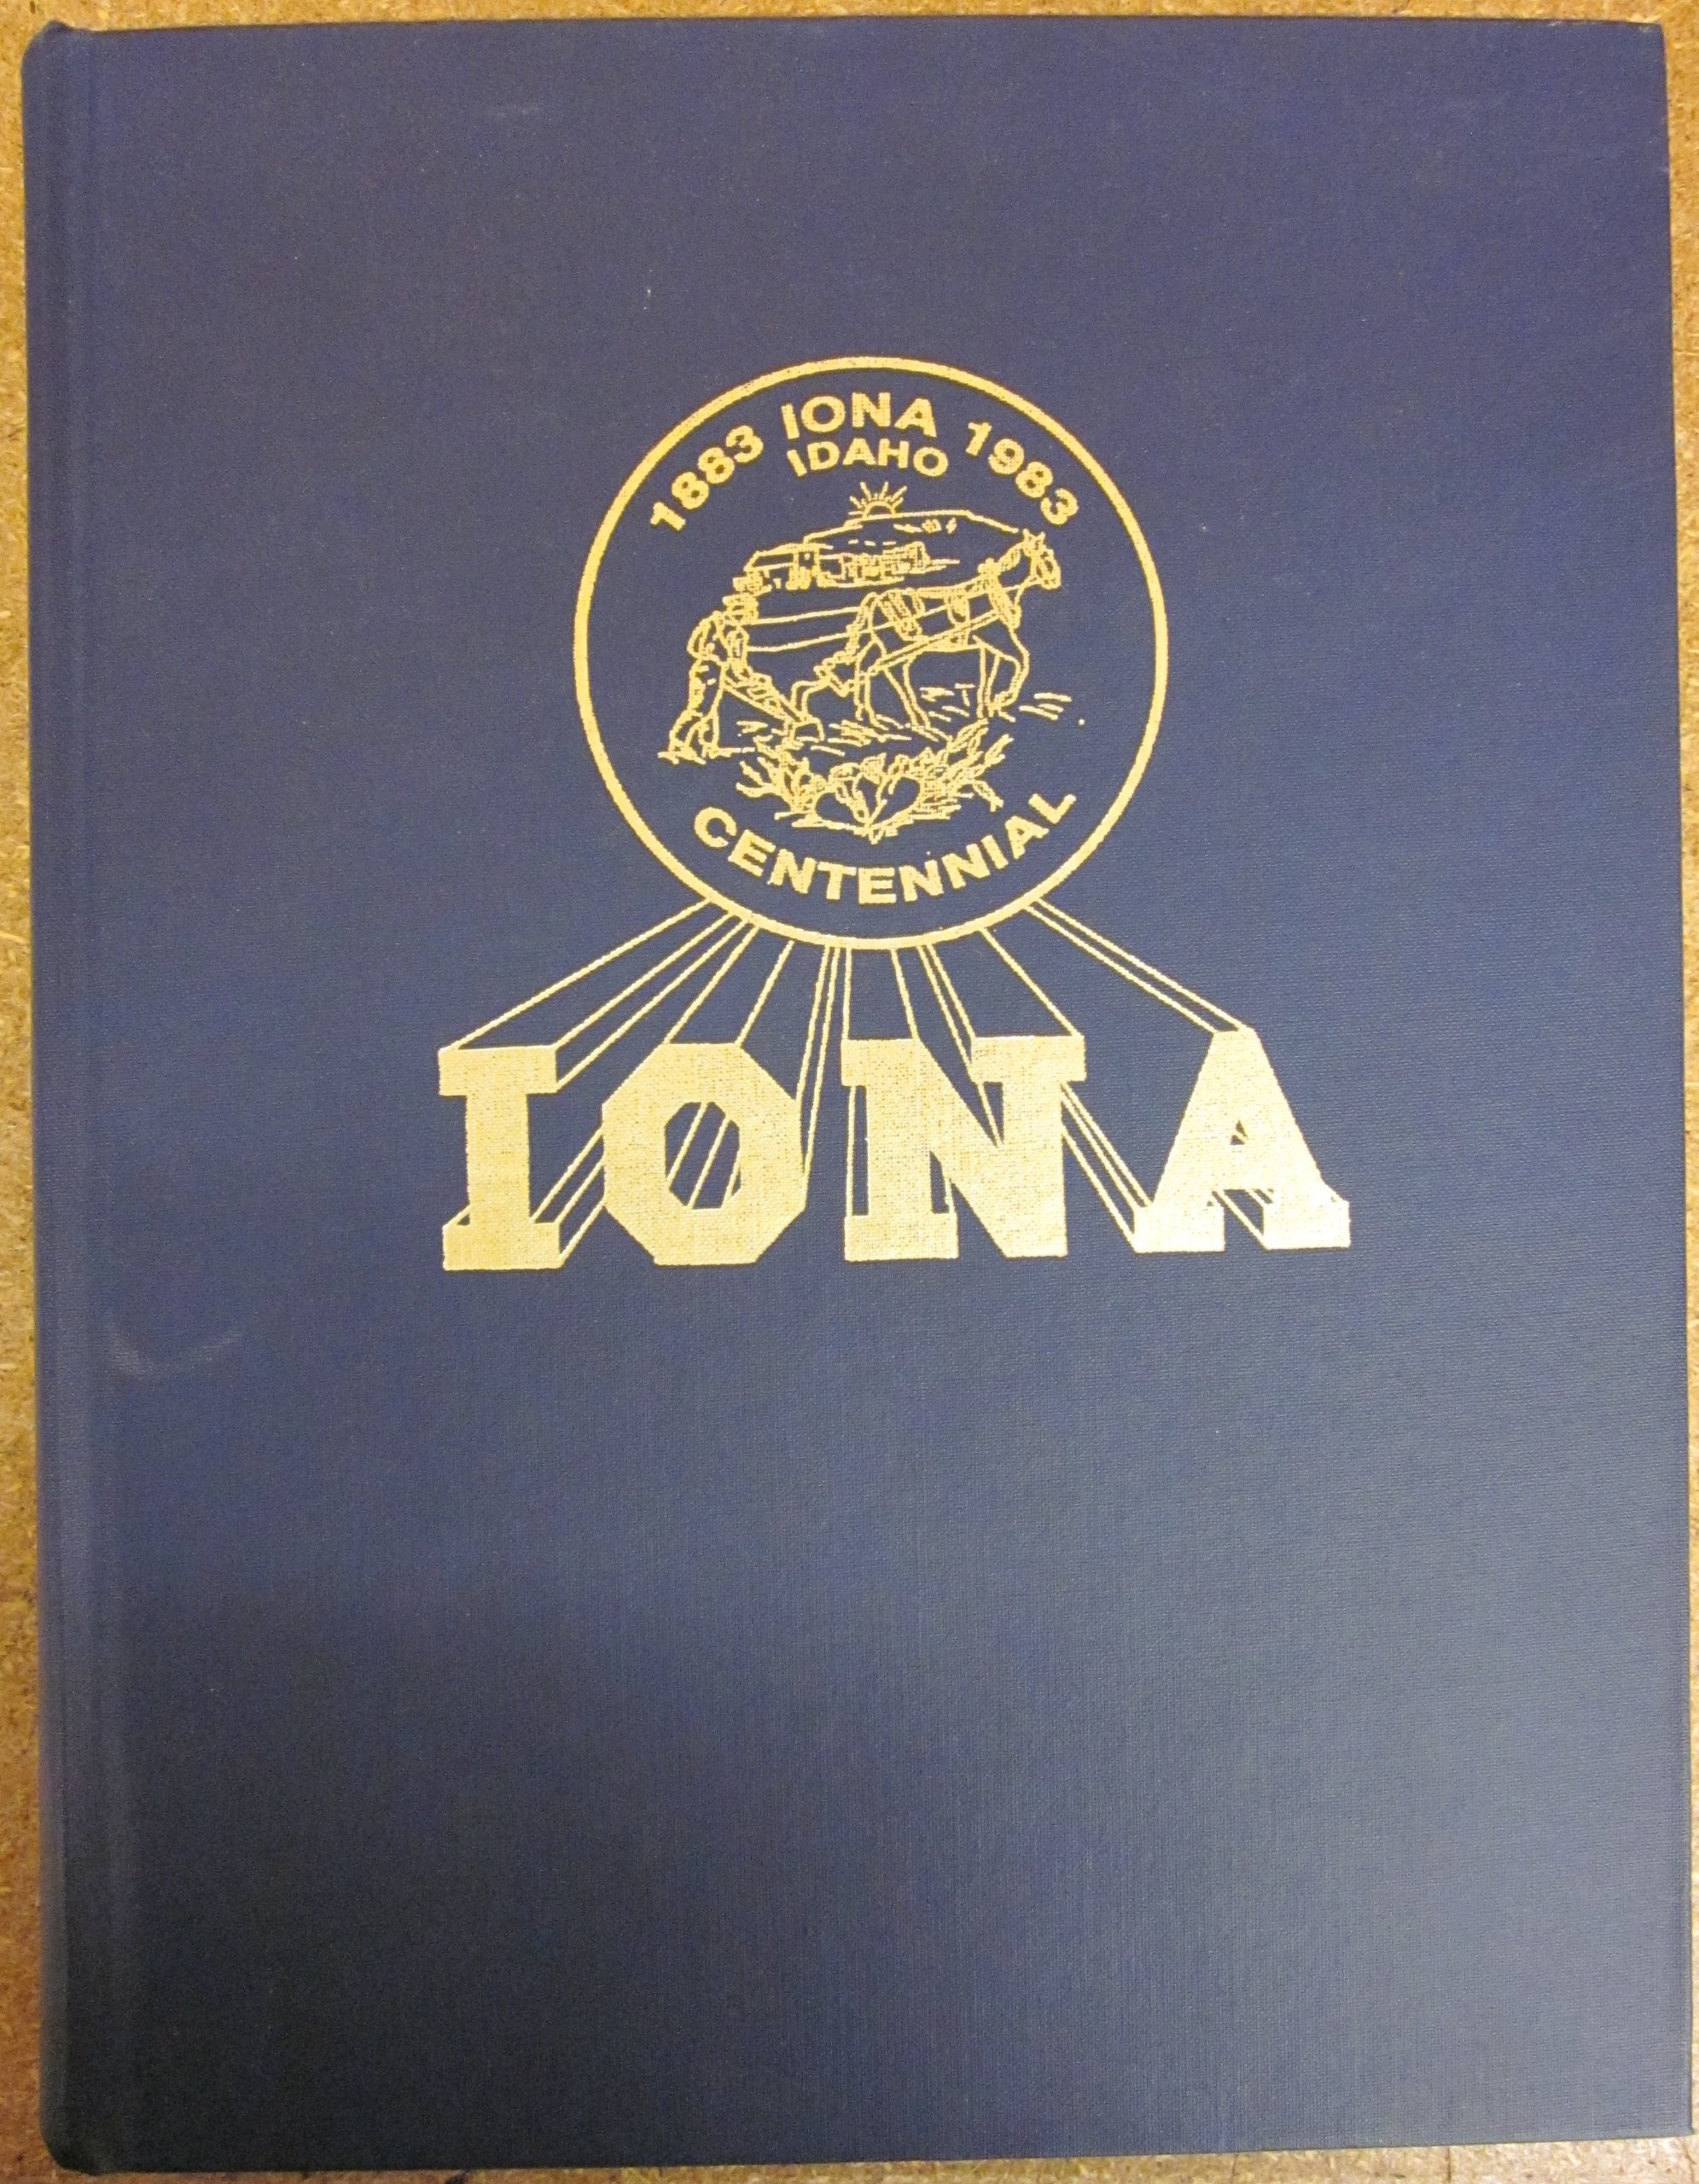 Iona centennial history book, 1883-1983: A centennial history book, containing historical material and personal histories, su ; bmitted by the residents and previous residents of Iona, Bonneville County, Idaho (book cover)